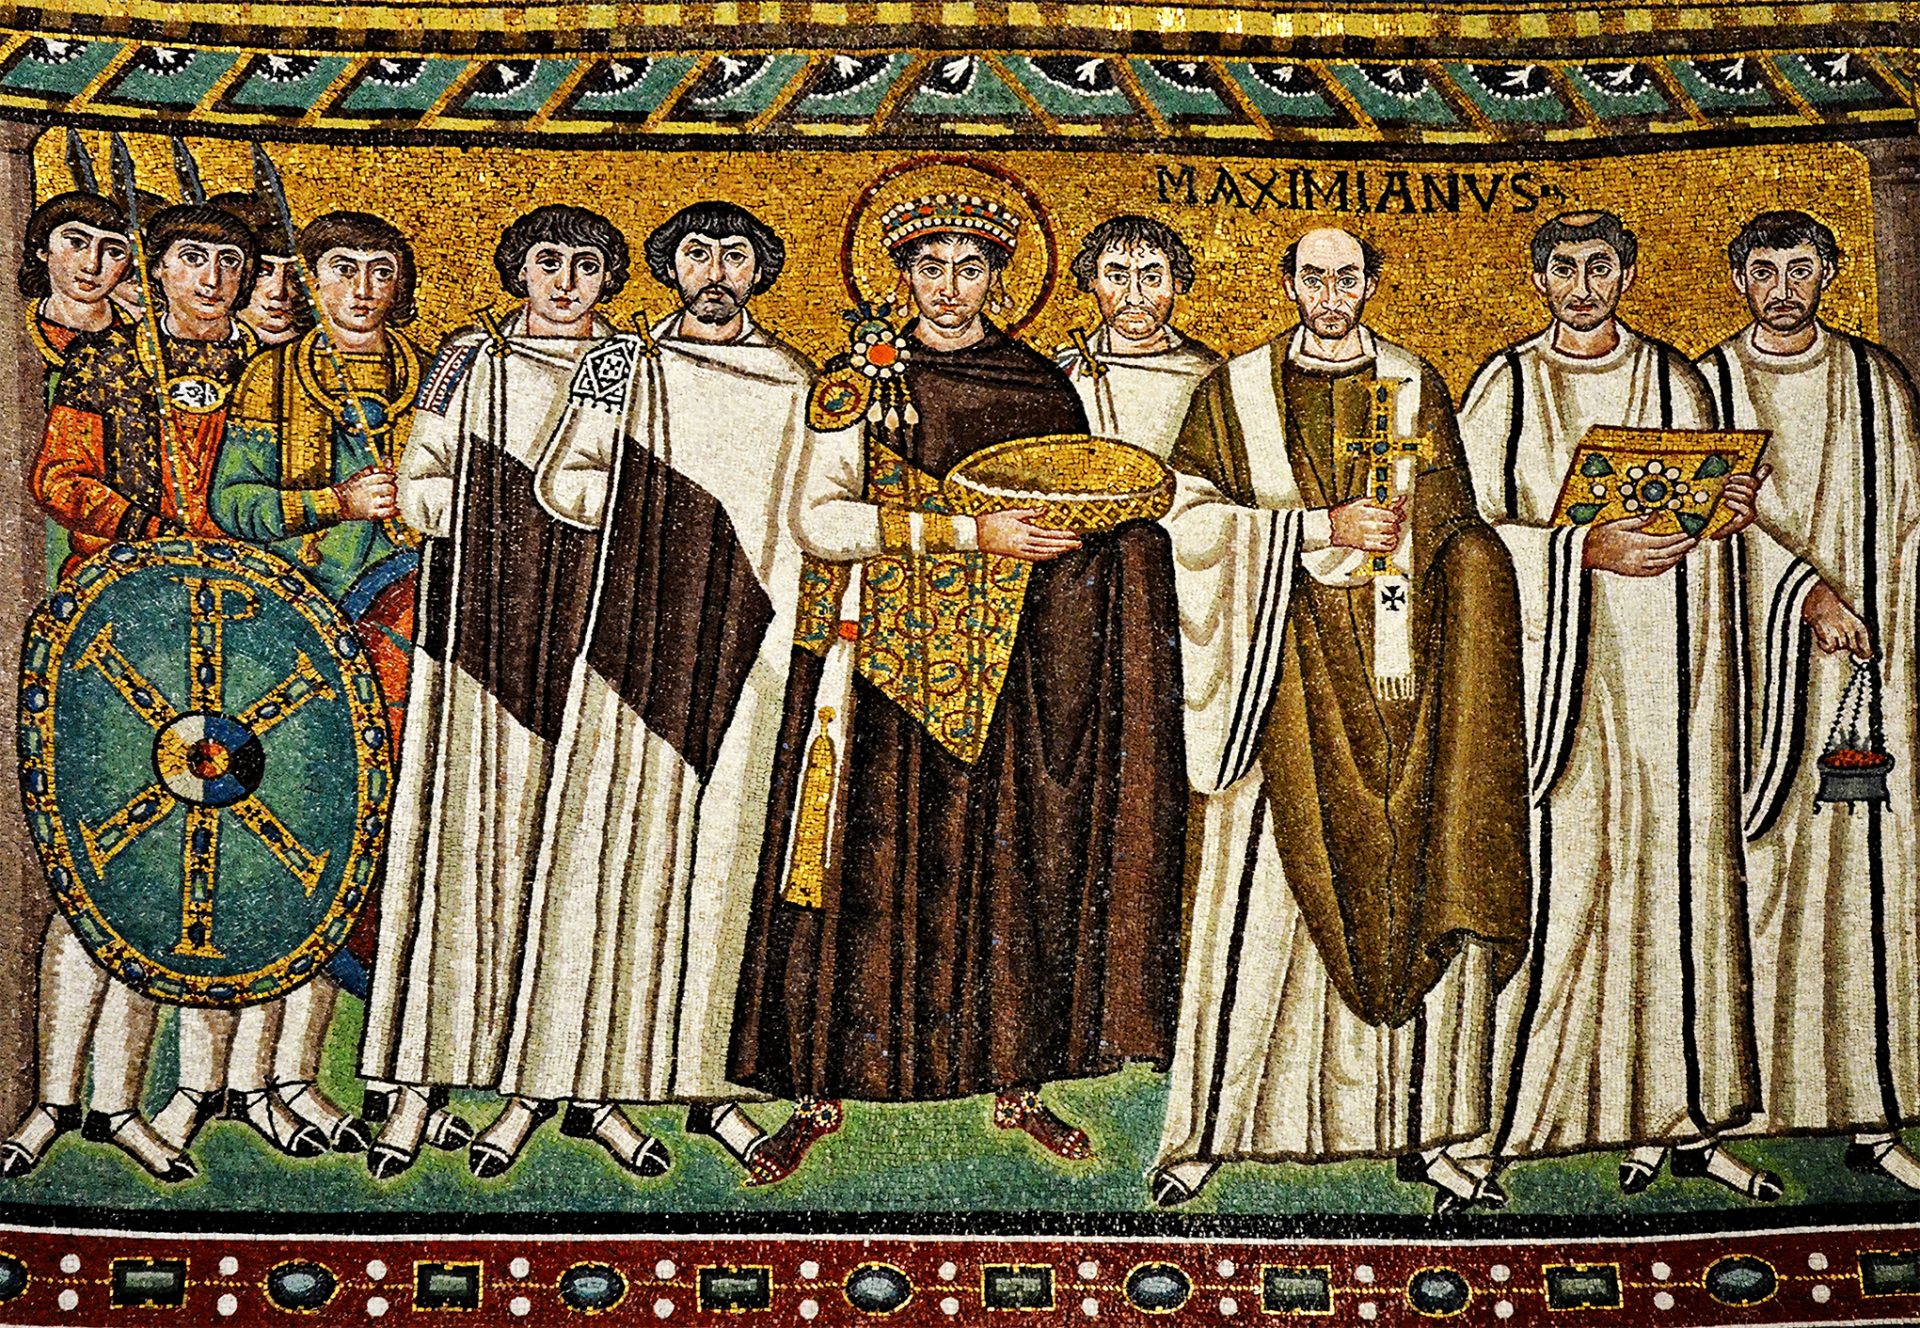 A mosaic from Basilica of San Vitale, Ravenna, Italy showing Emperor Justinian and his entourage including guards and clergymen.